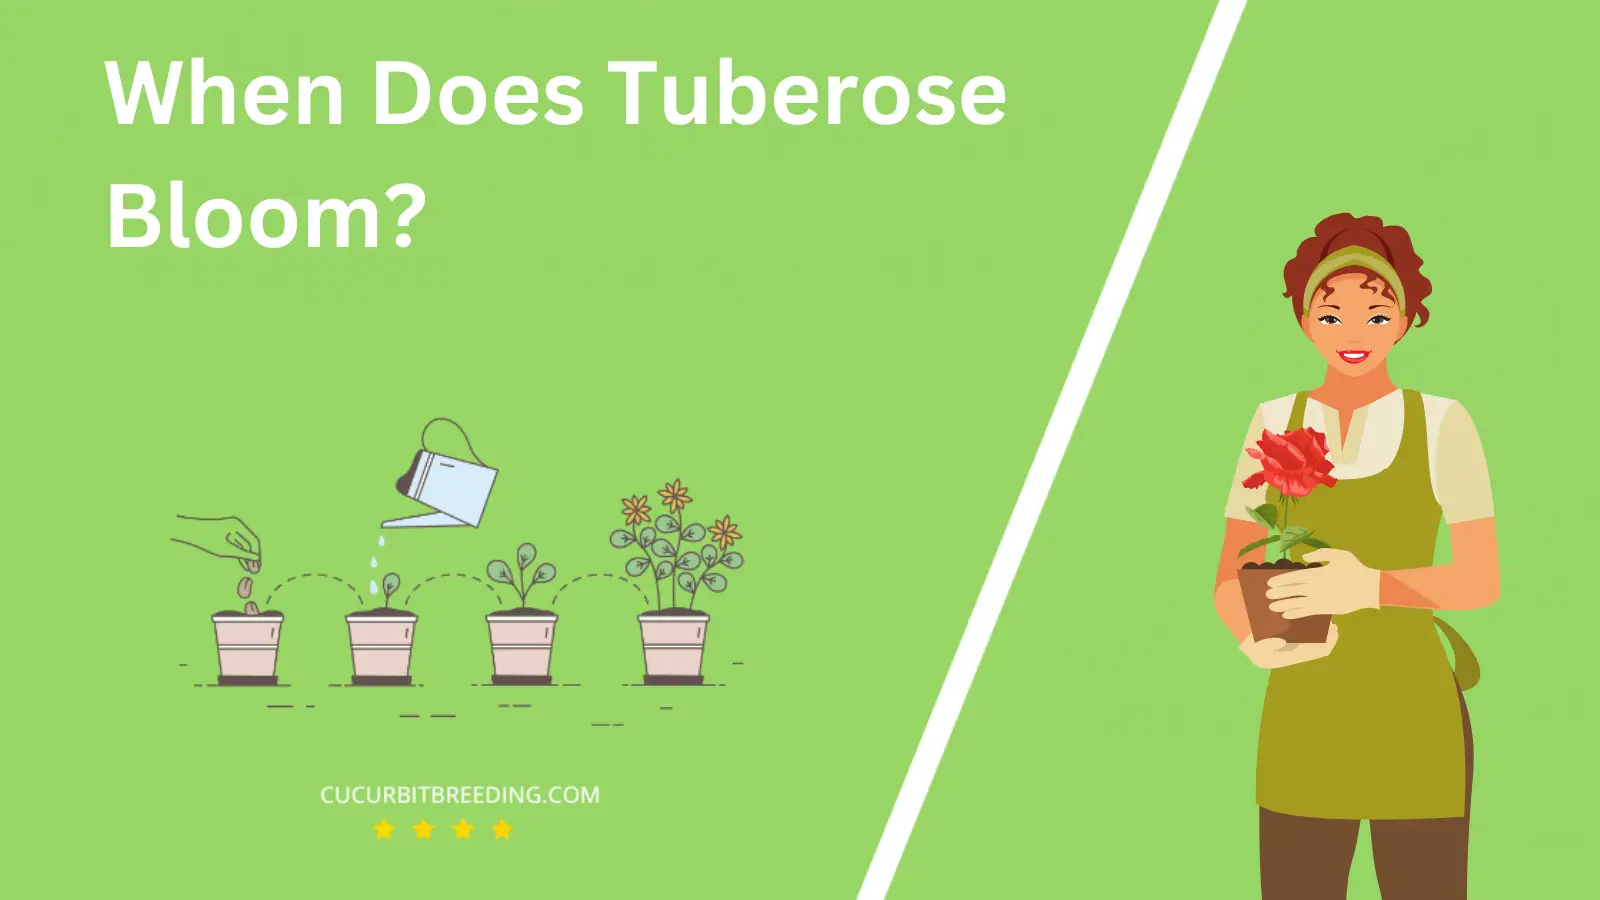 When Does Tuberose Bloom?